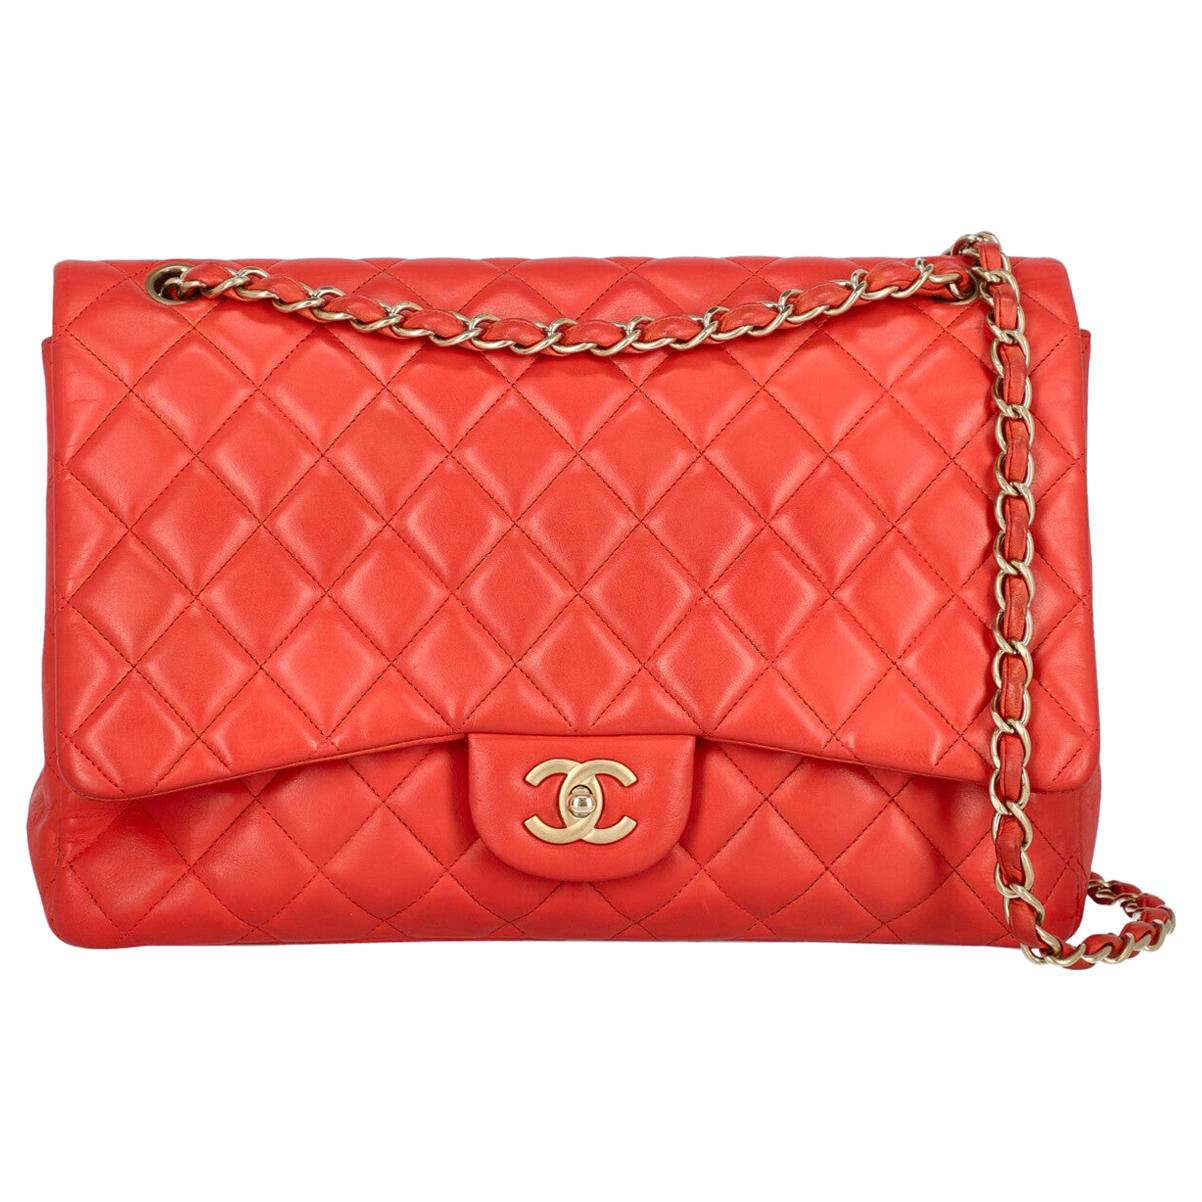 Chanel Woman Timeless Red 